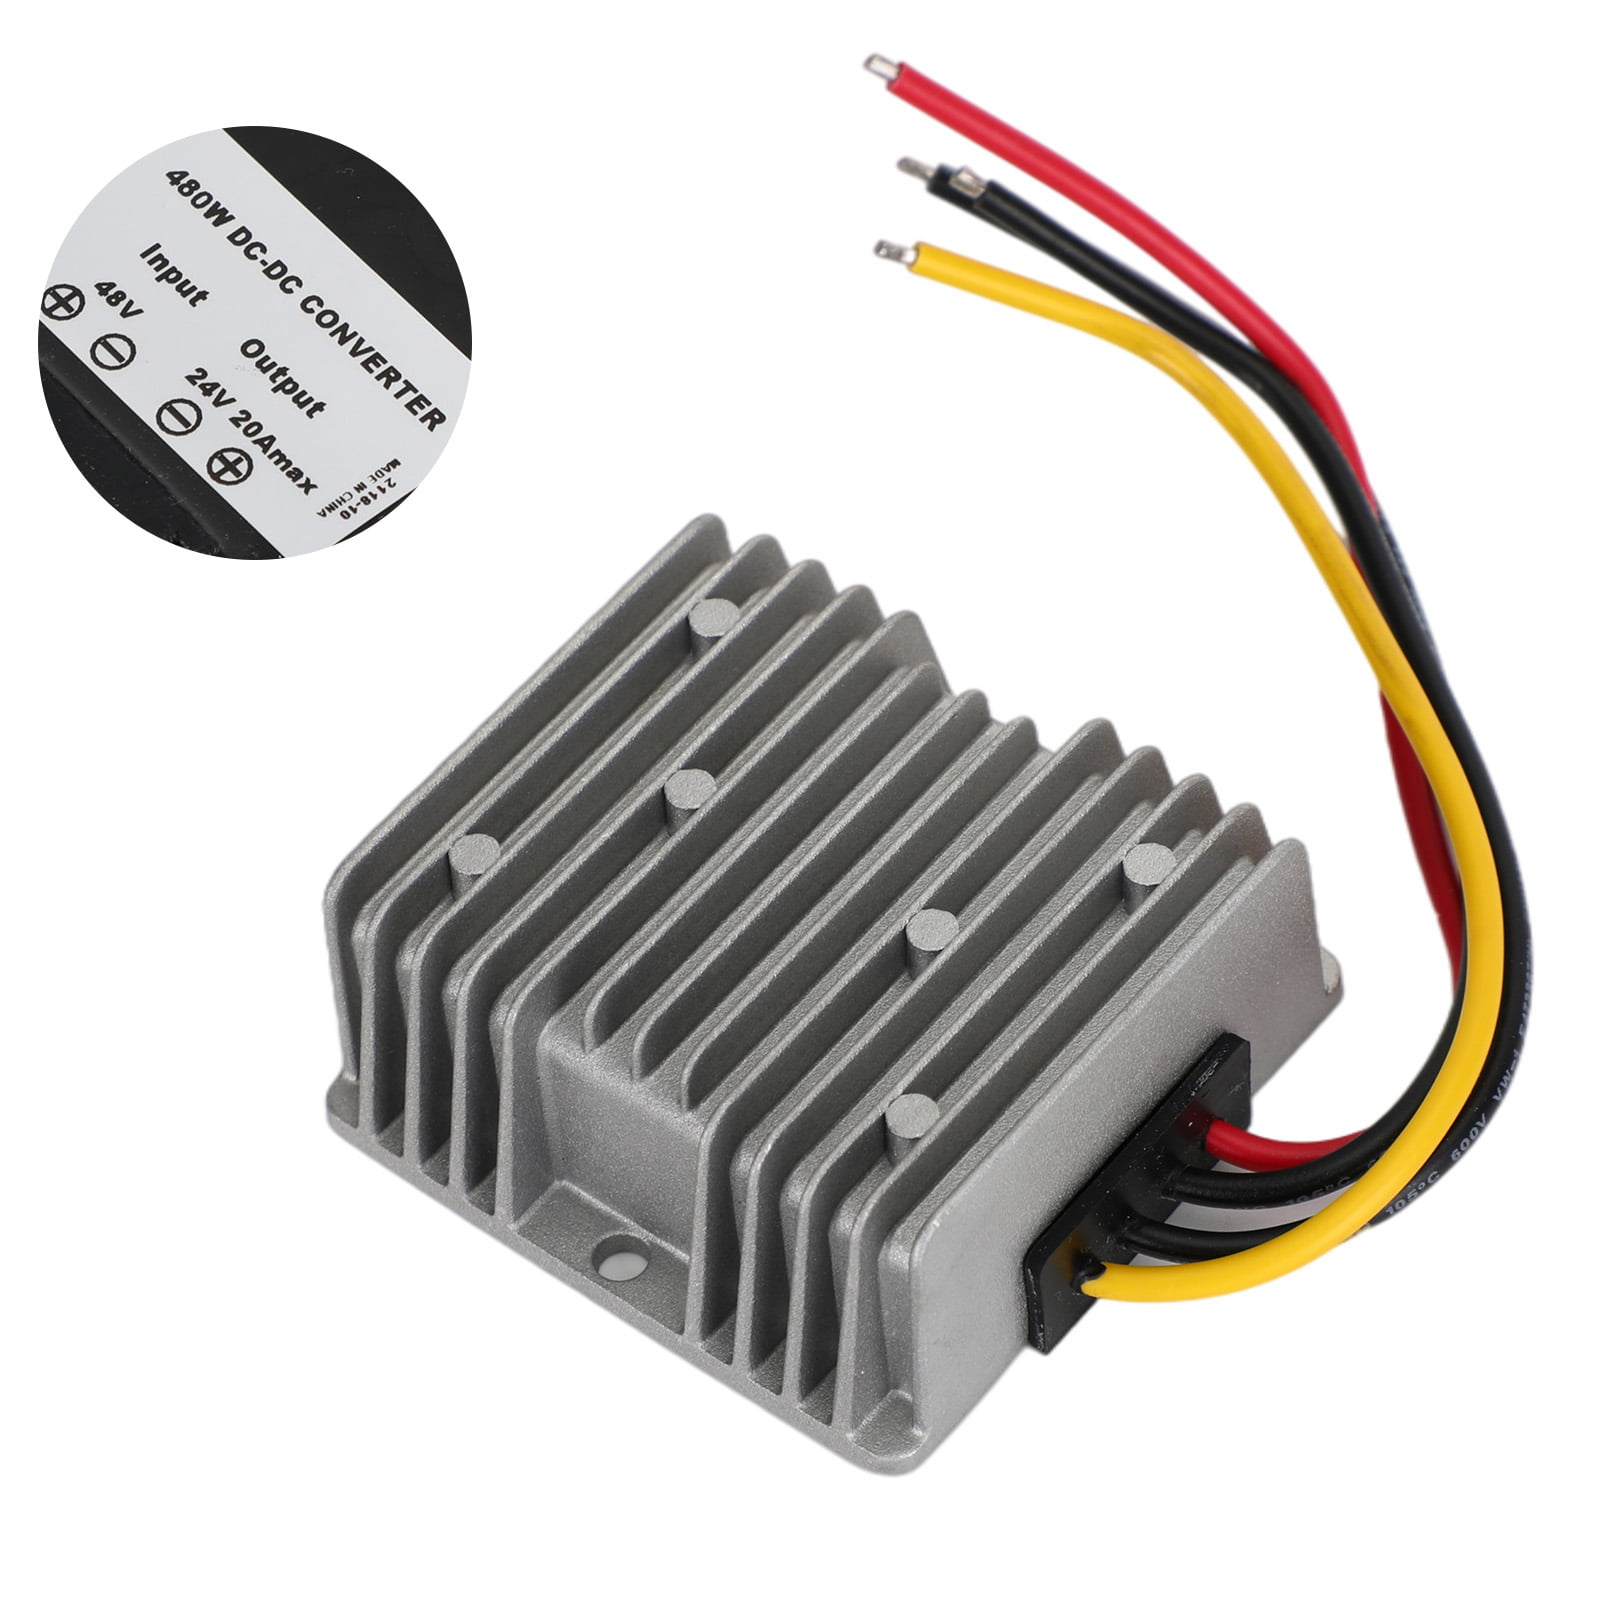 New DC Step-Up Boost Converter 12V to 48V 3A 144W Power Supply For Car 